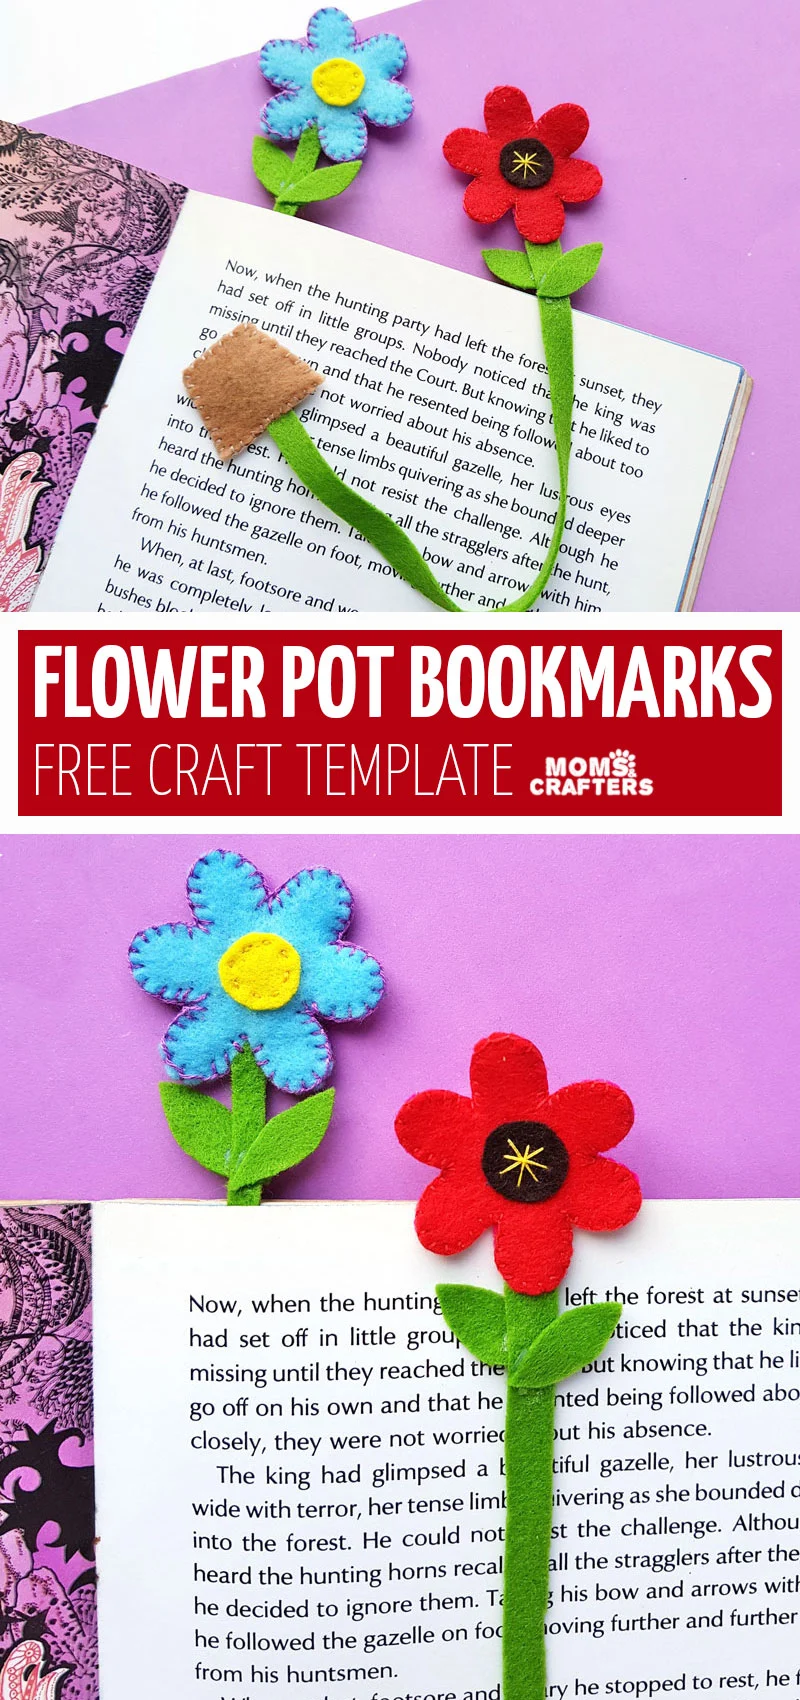 Click for a free template to make this flower bookmarks craft! This fun back to school craft for tweens is great to encourage reading and a fun beginner sewing project fort eens and tweens. 